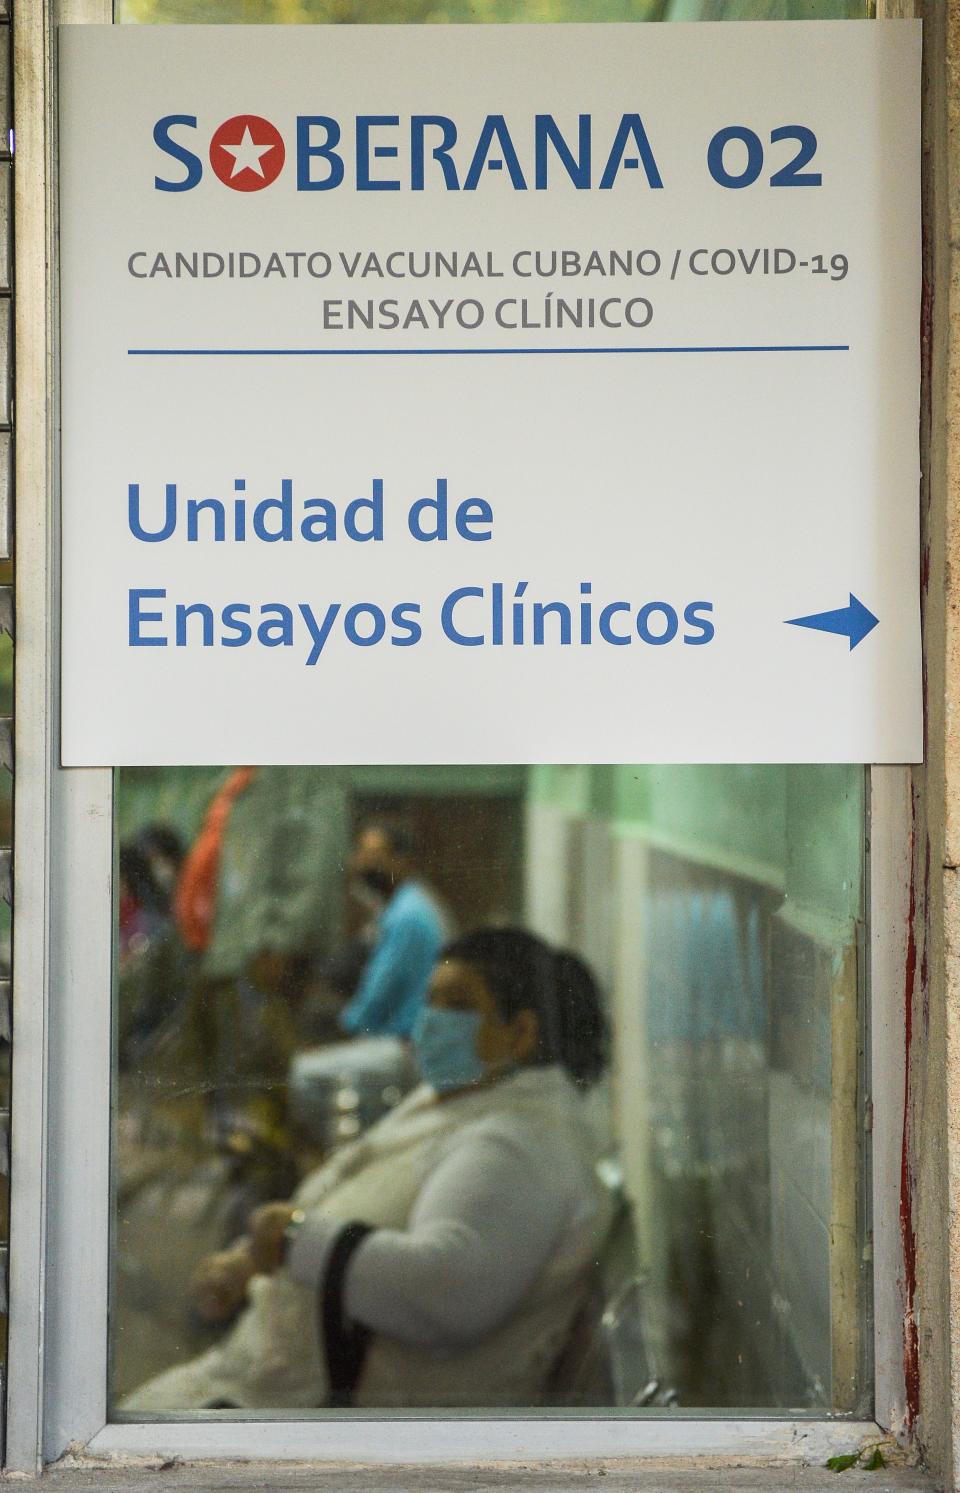 A woman waits behind a sign of the polyclinic where the phase II b of the clinical trial of the Soberana 02 vaccine candidate against Covid-19 is being carried out, in Havana, on January 19, 2021. (Photo by YAMIL LAGE / AFP) (Photo by YAMIL LAGE/AFP via Getty Images)